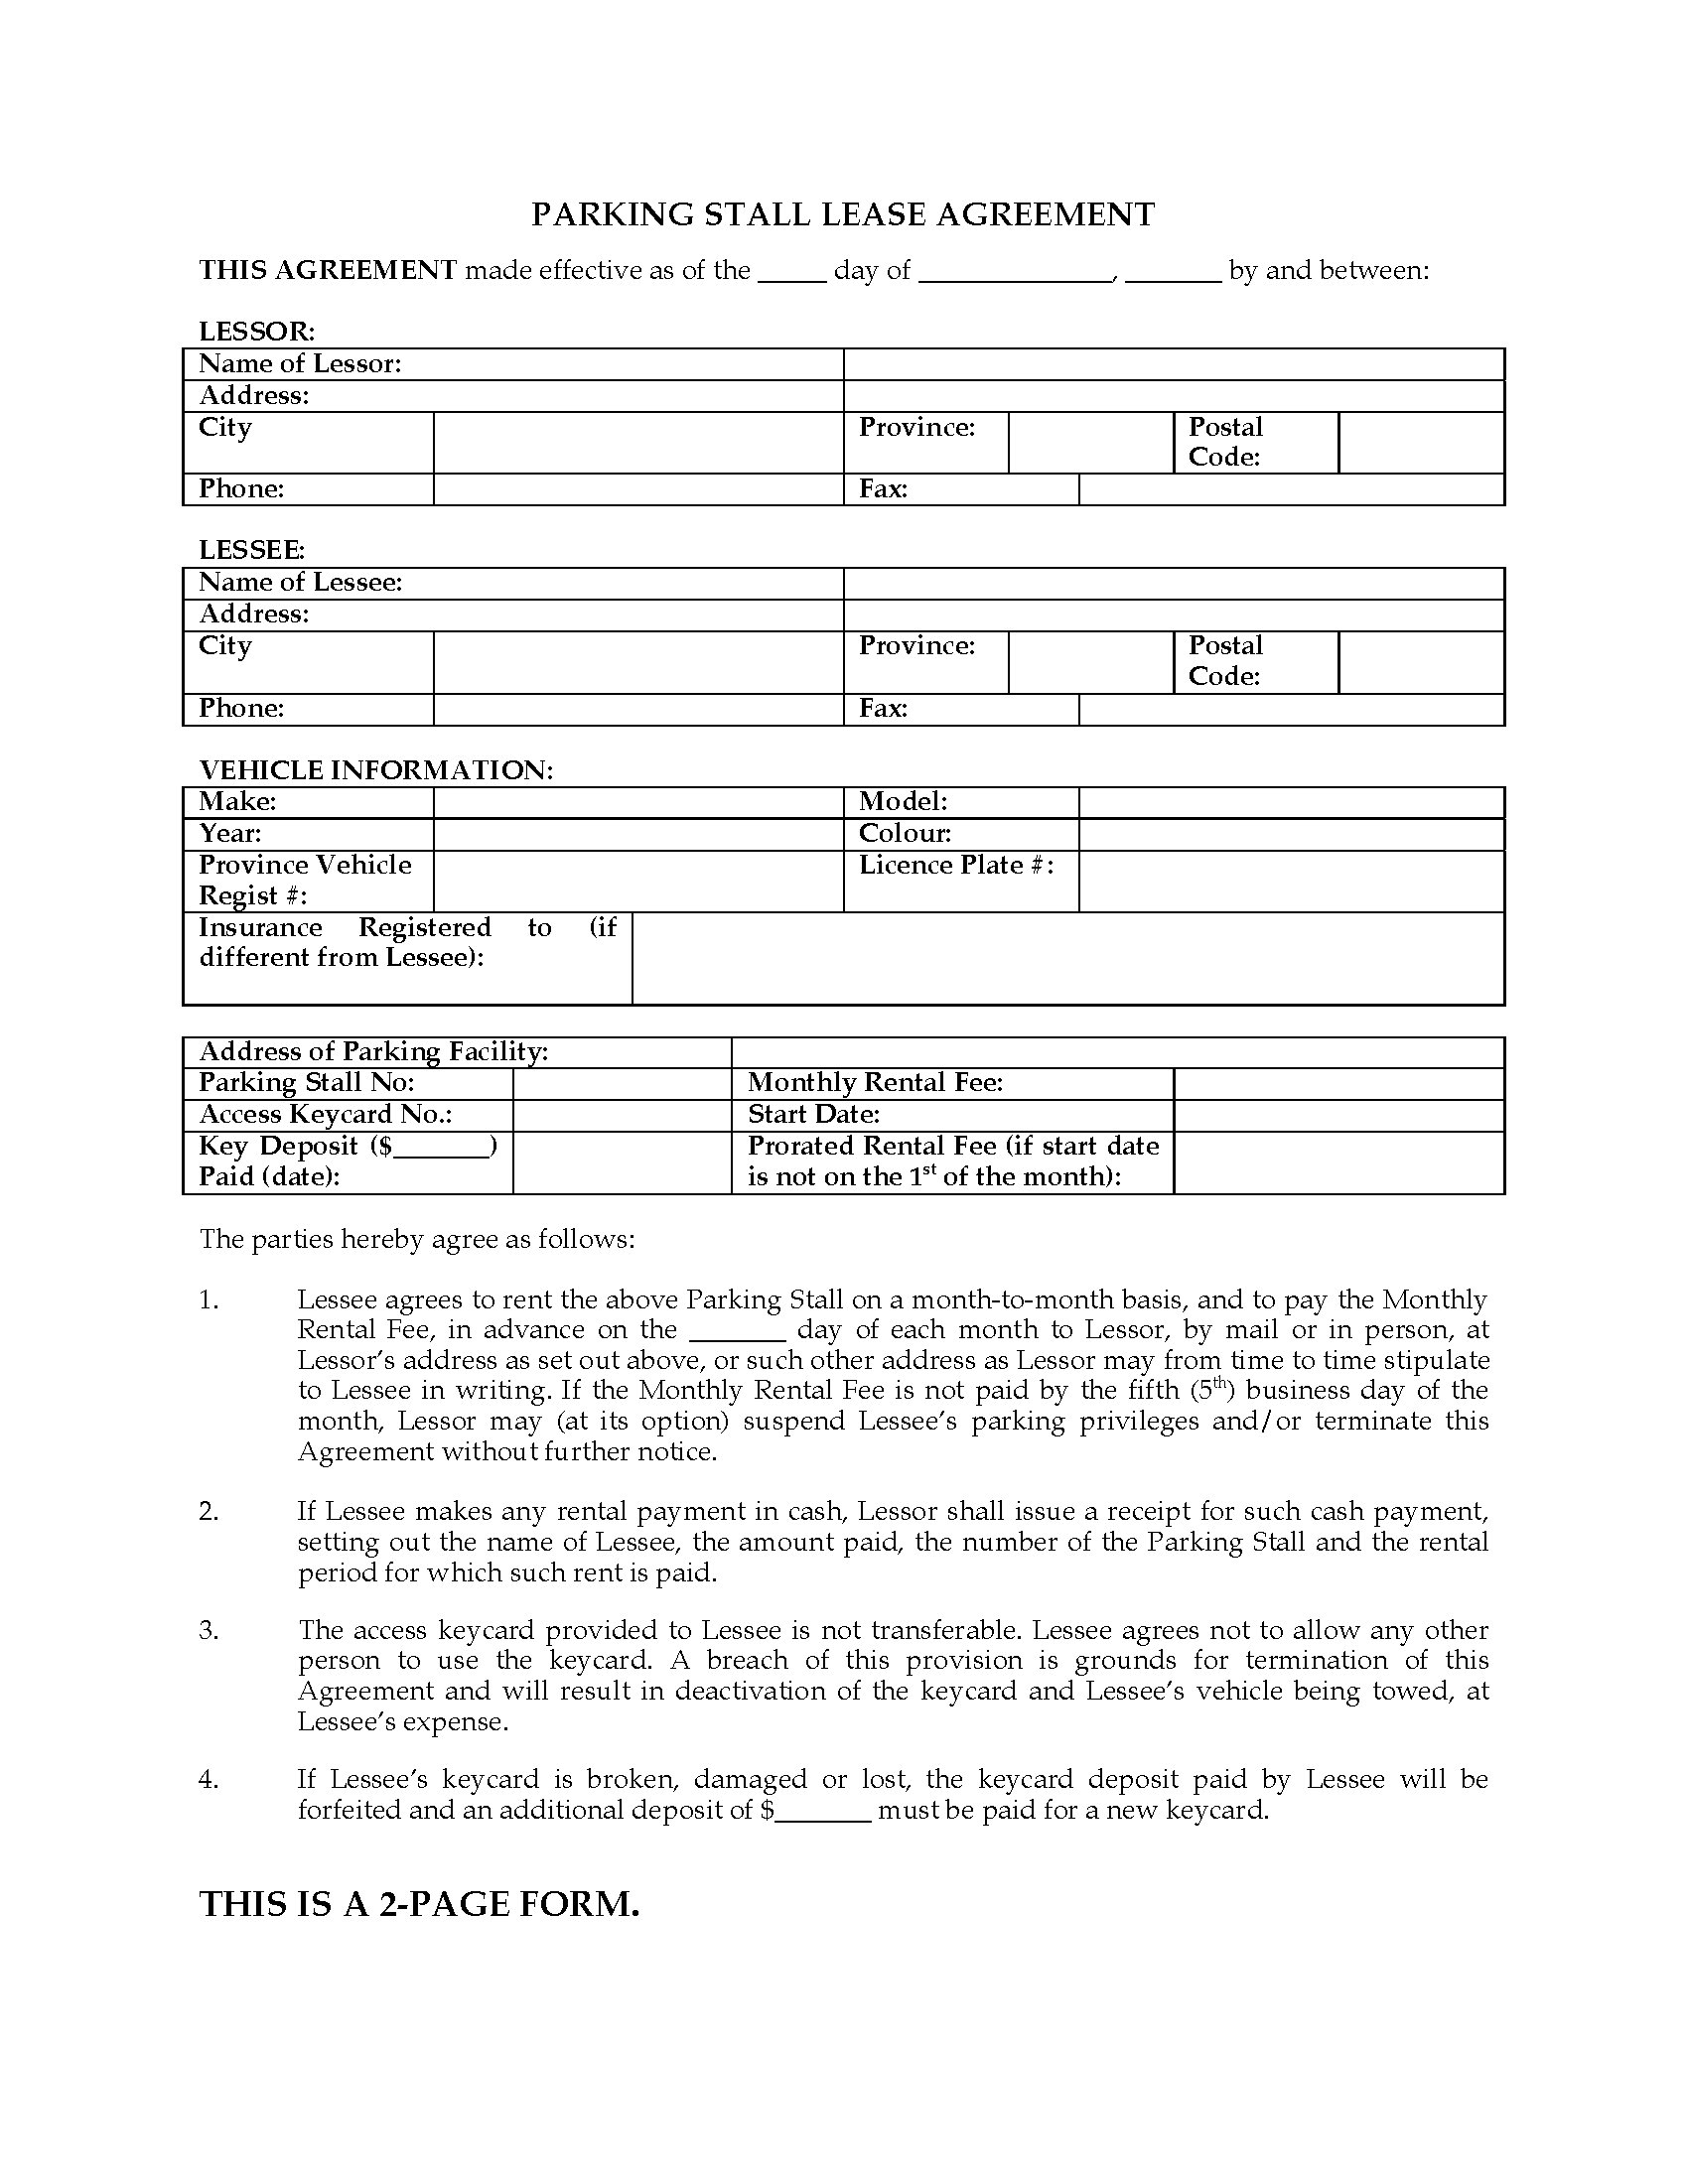 Rental Agreement Example British Columbia Parking Stall Lease Form Legal Forms And Business